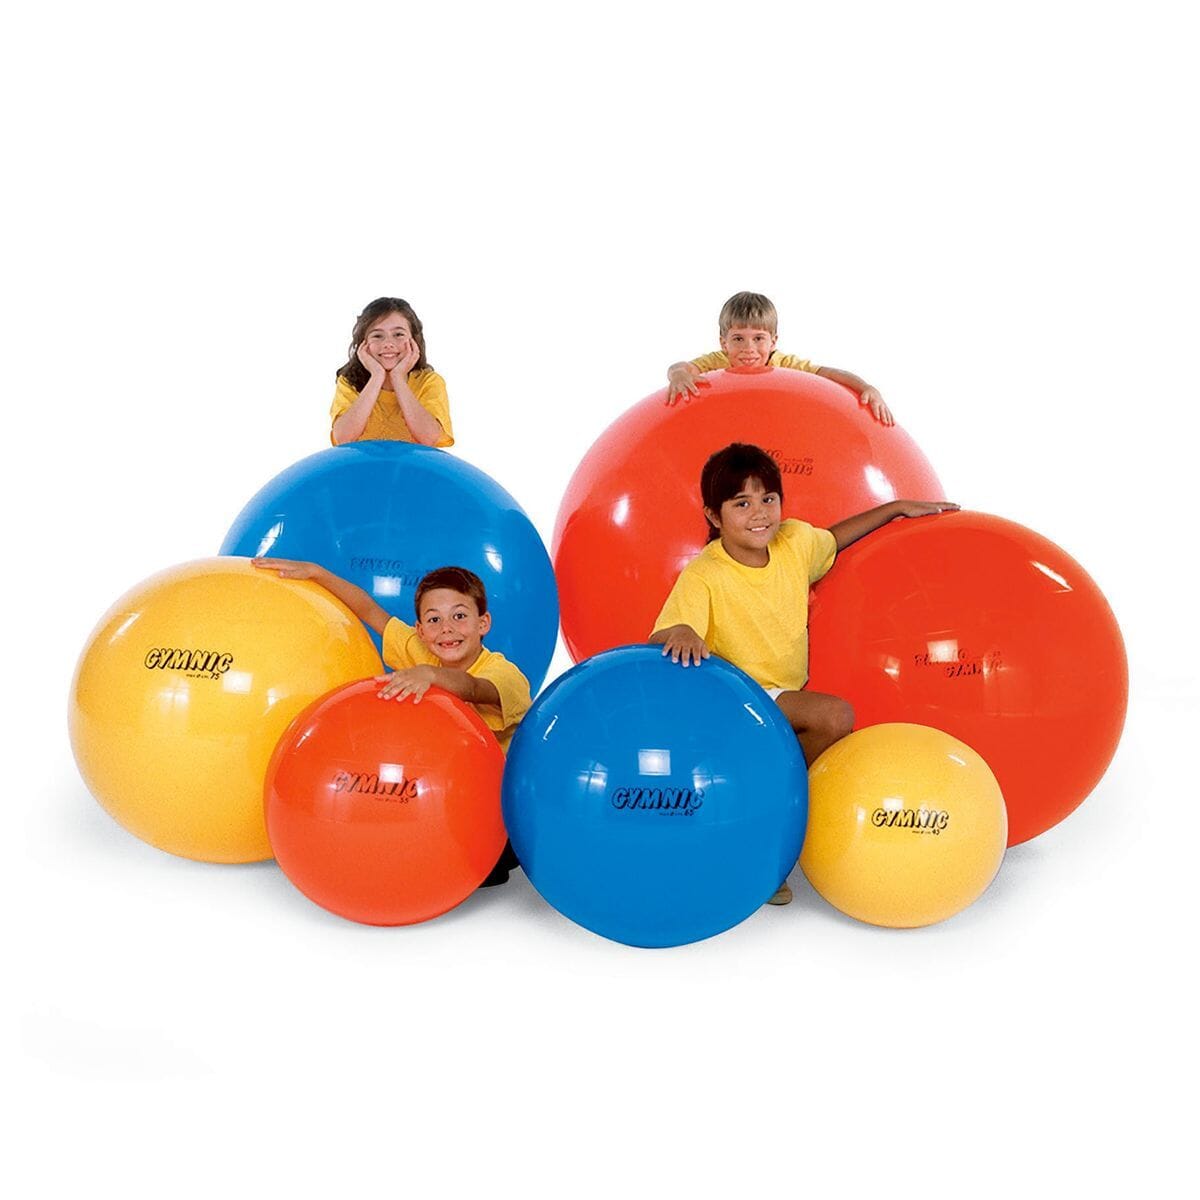 View Gymnic Classic Exercise Balls Diameter 450mm yellow information